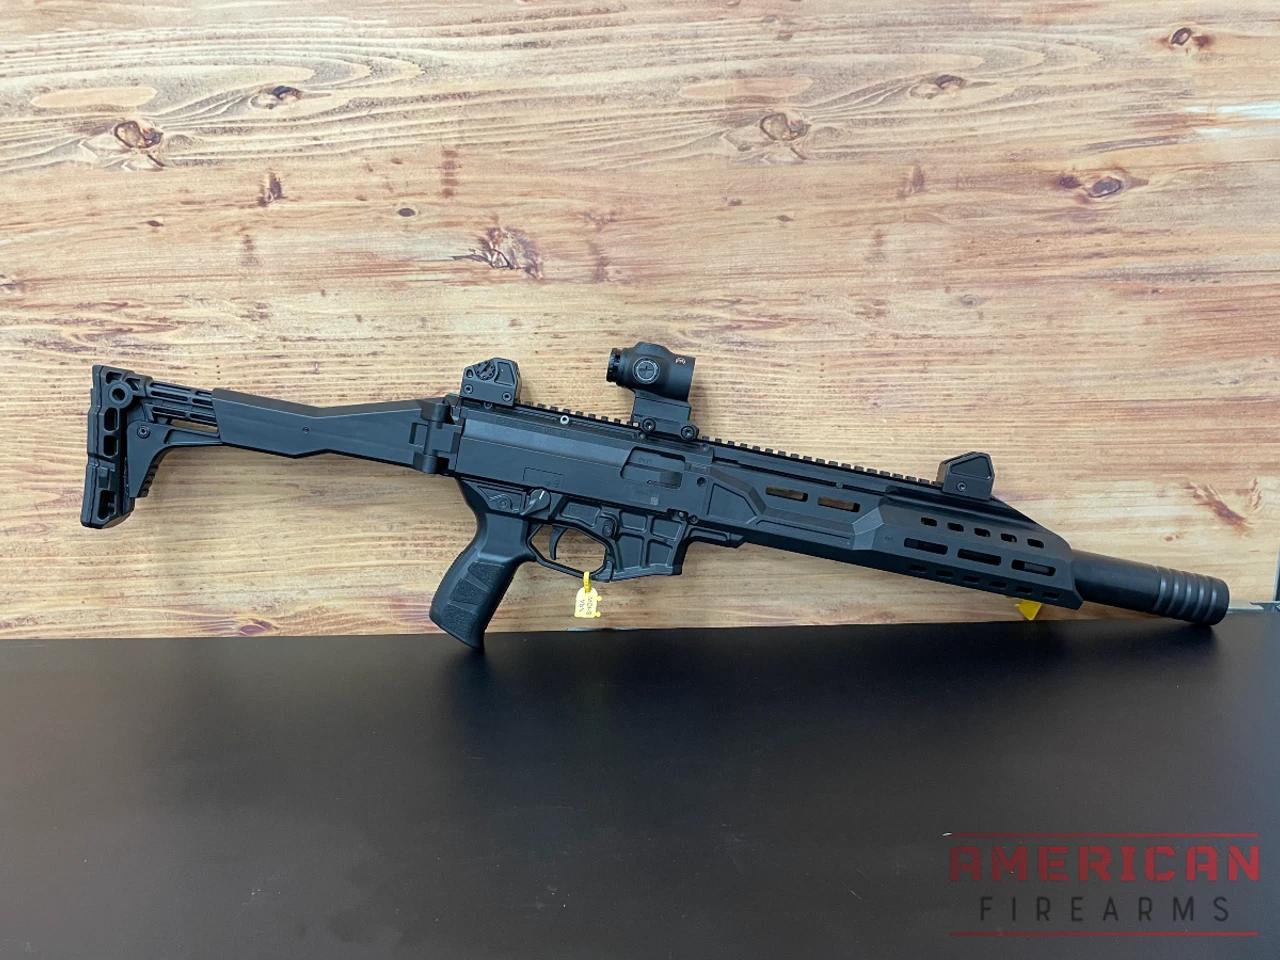 CZ replaced the Scorpion 3 with the Scorpion 3 Plus (because "Scorpion 4" wasn't available?) and last week added a full-on pistol caliber carbine model to the list of Scorps.